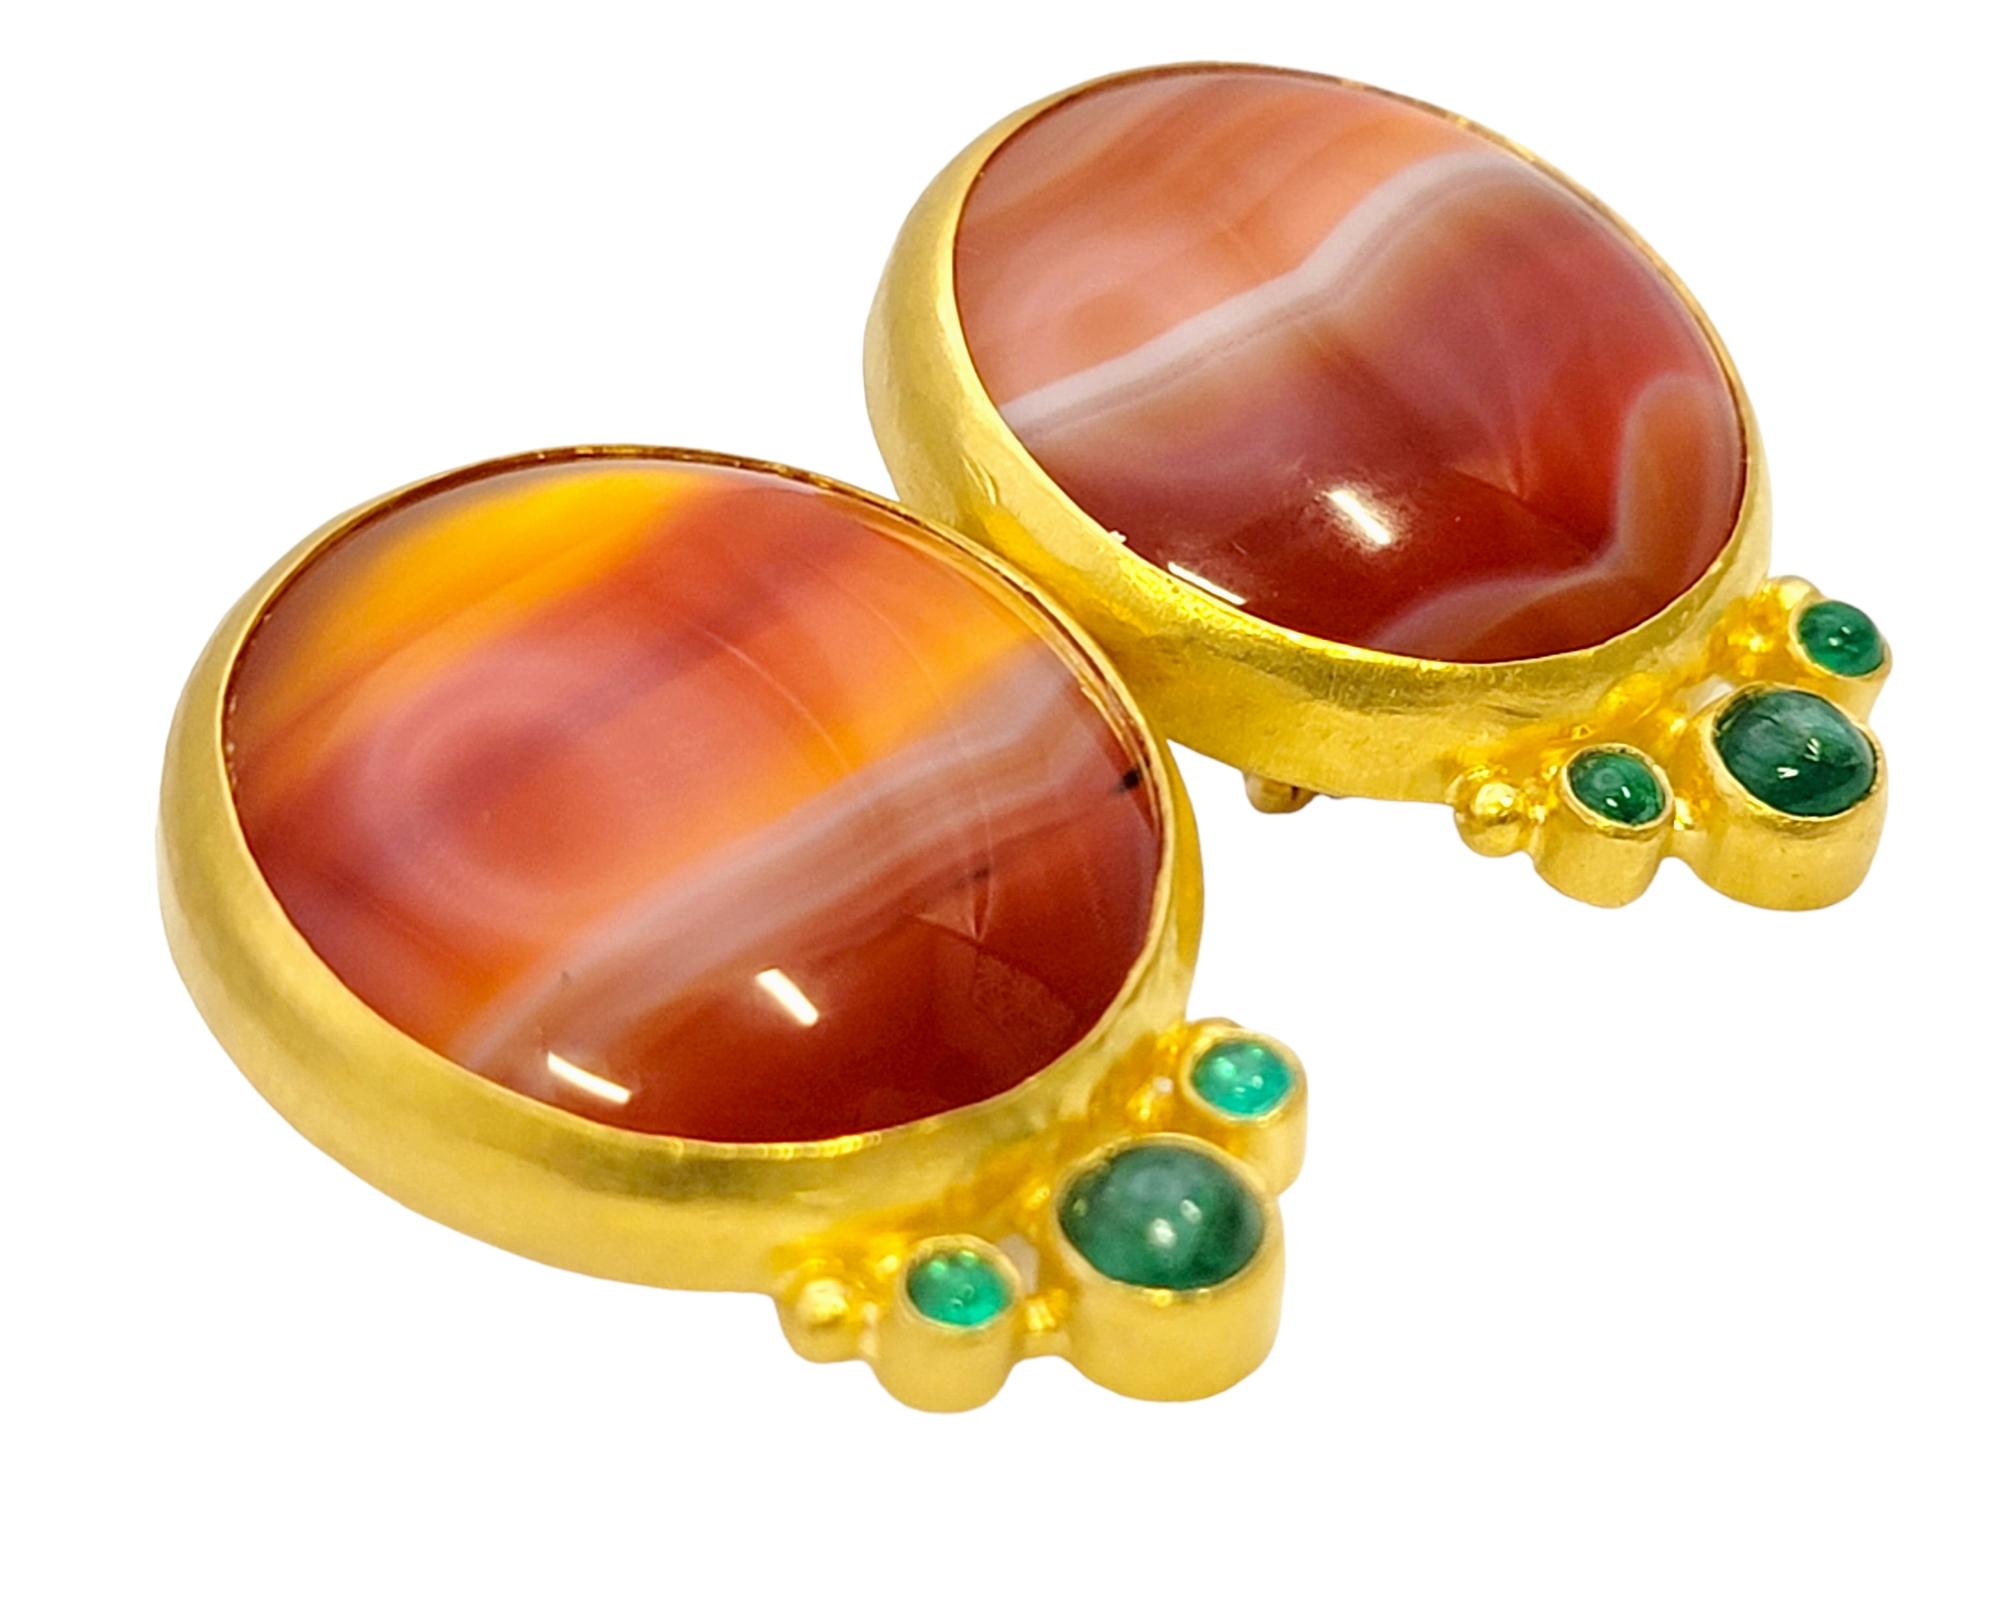 Fabulously unique statement earrings filled with exceptional color and fine details. Each singular stone has its own natural striations, varying hues and raw design, creating a truly one-of-a-kind pair.  

These natural beauties each feature a